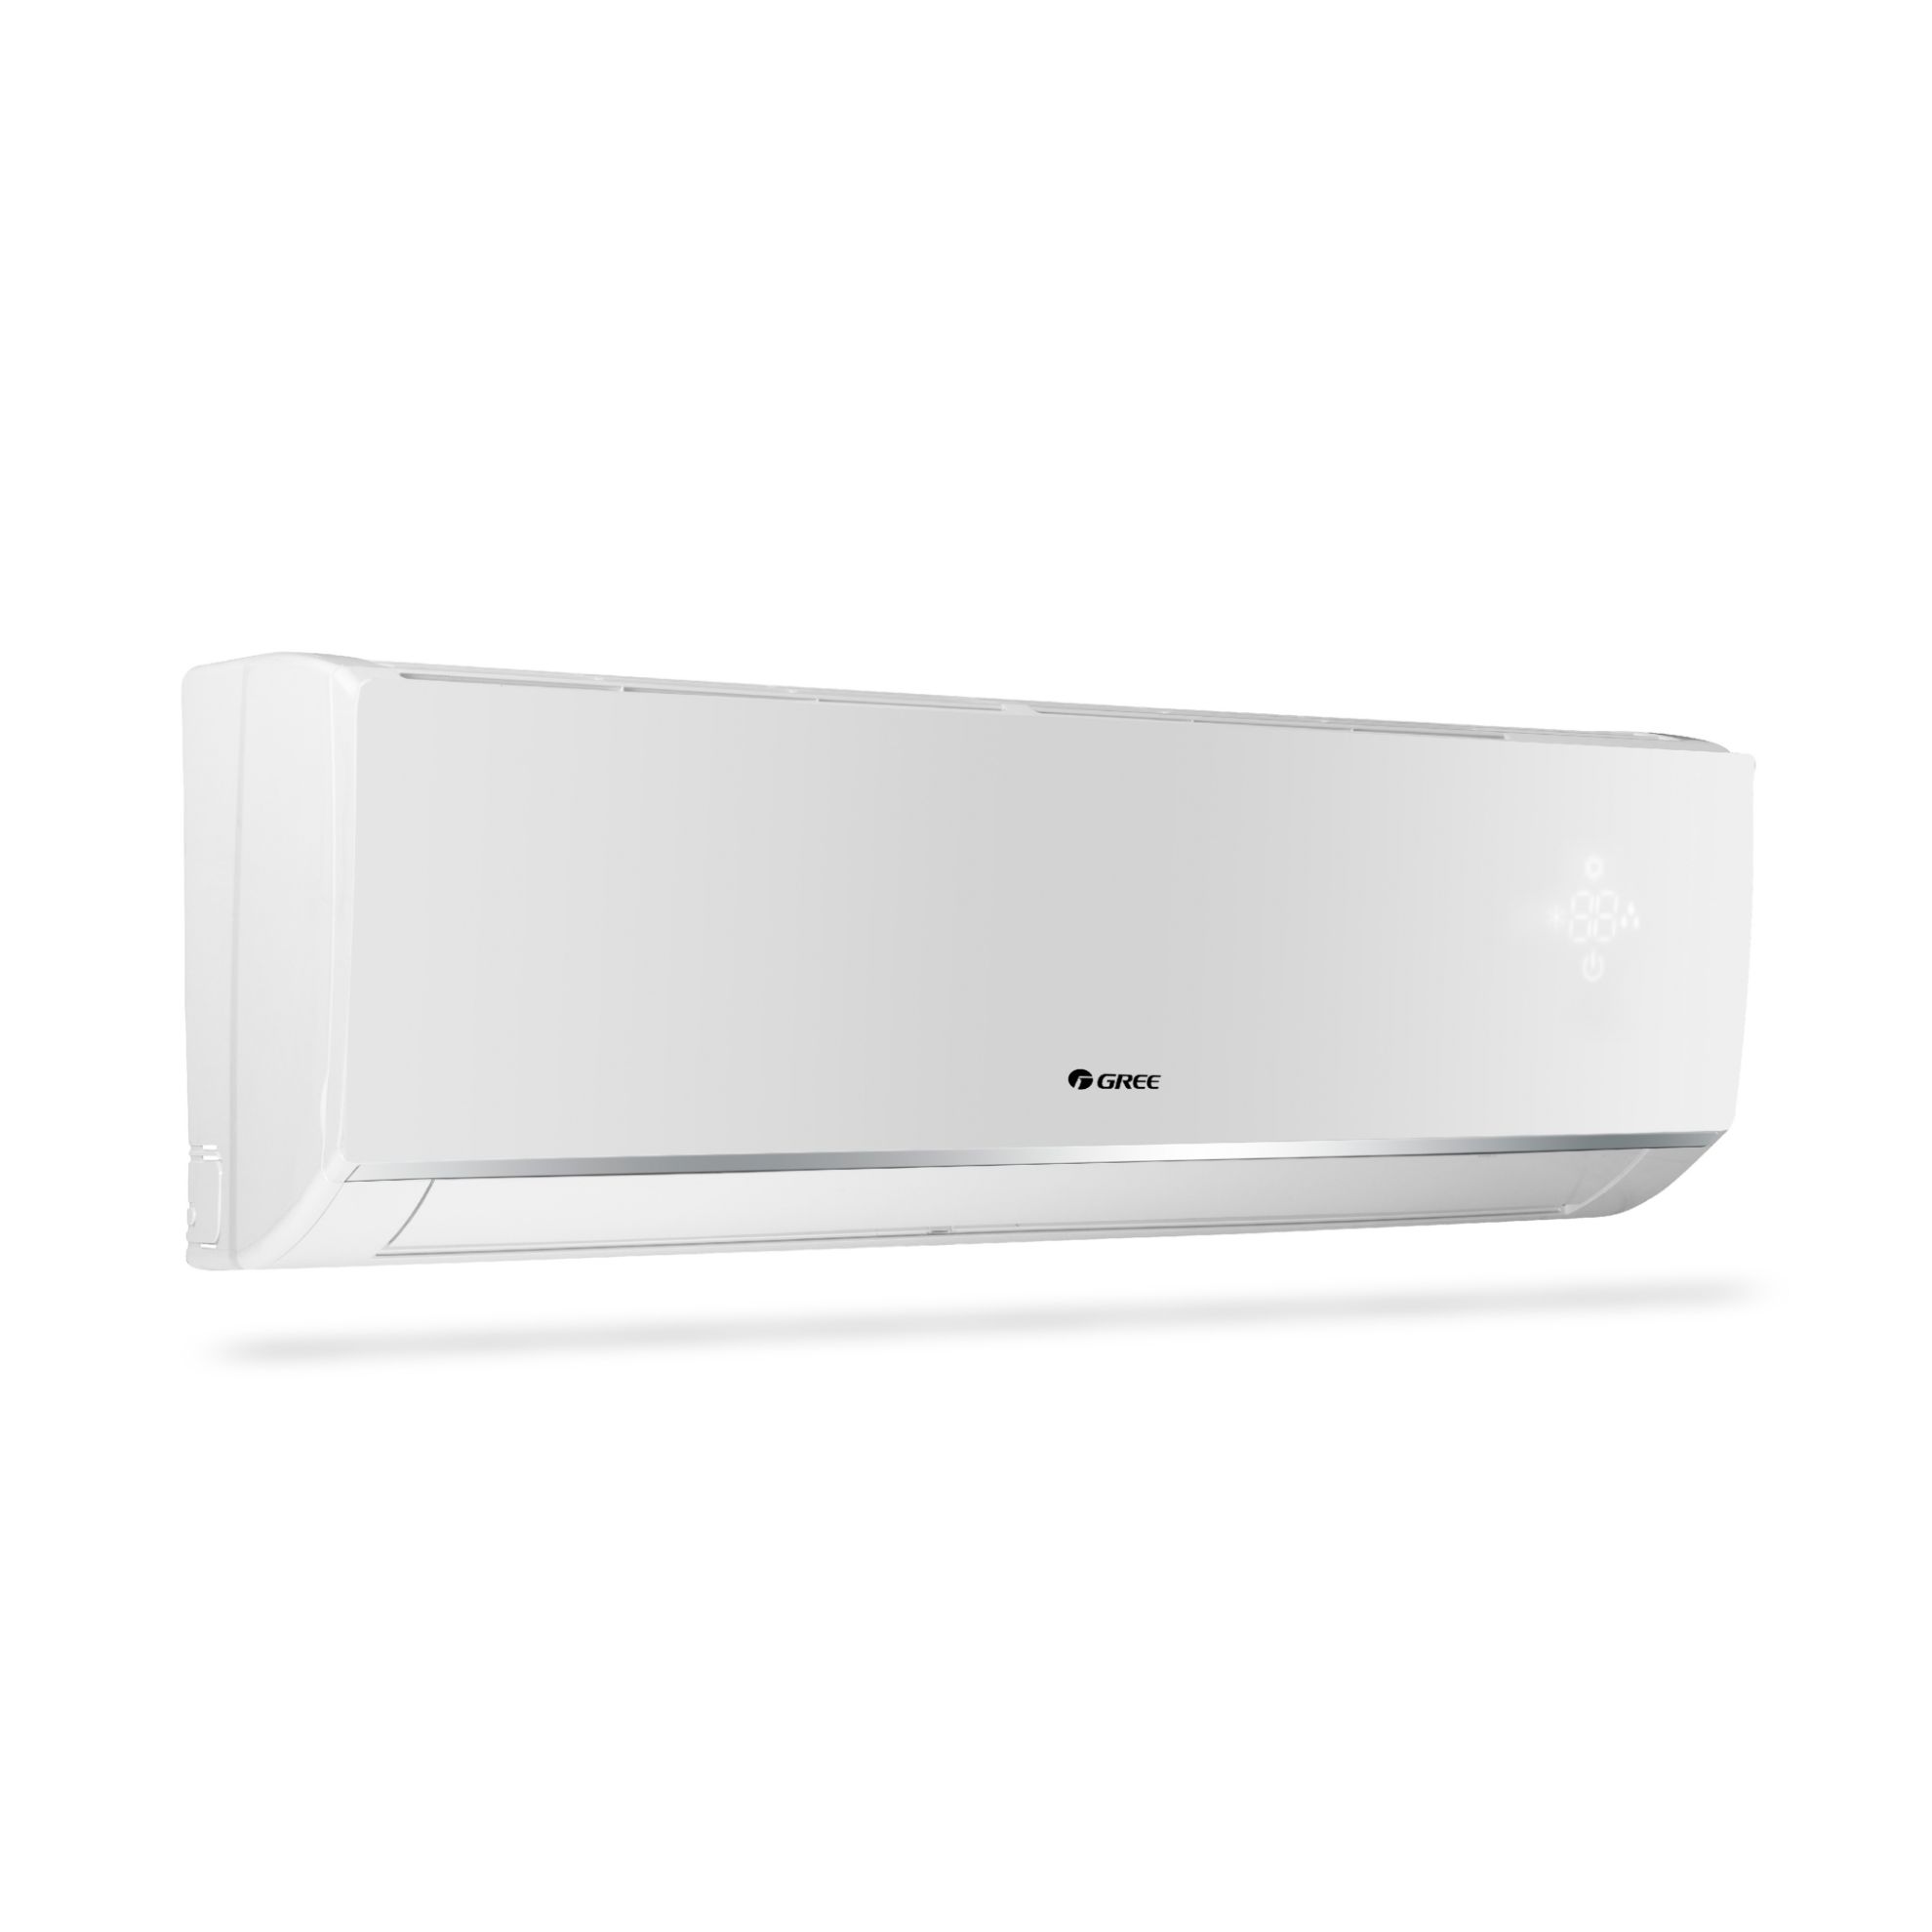 Picture of Gree - G4'matic-R25C3 - 2.0 Ton|Reciprocating|Wall Split AC